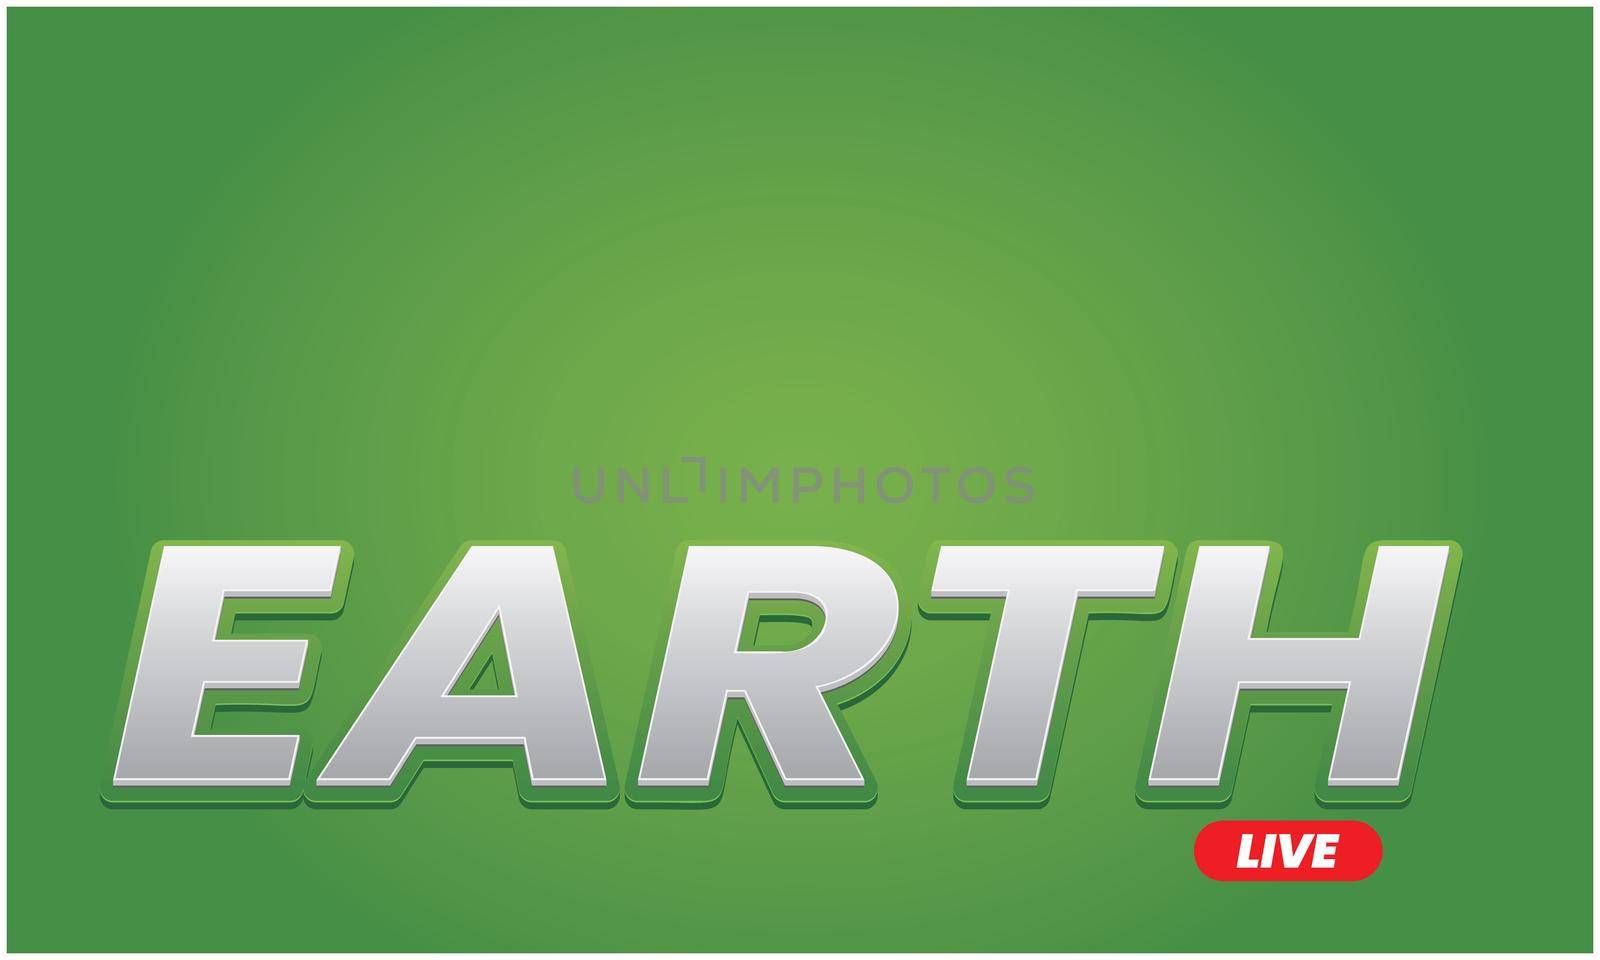 live from earth on abstract green background by aanavcreationsplus